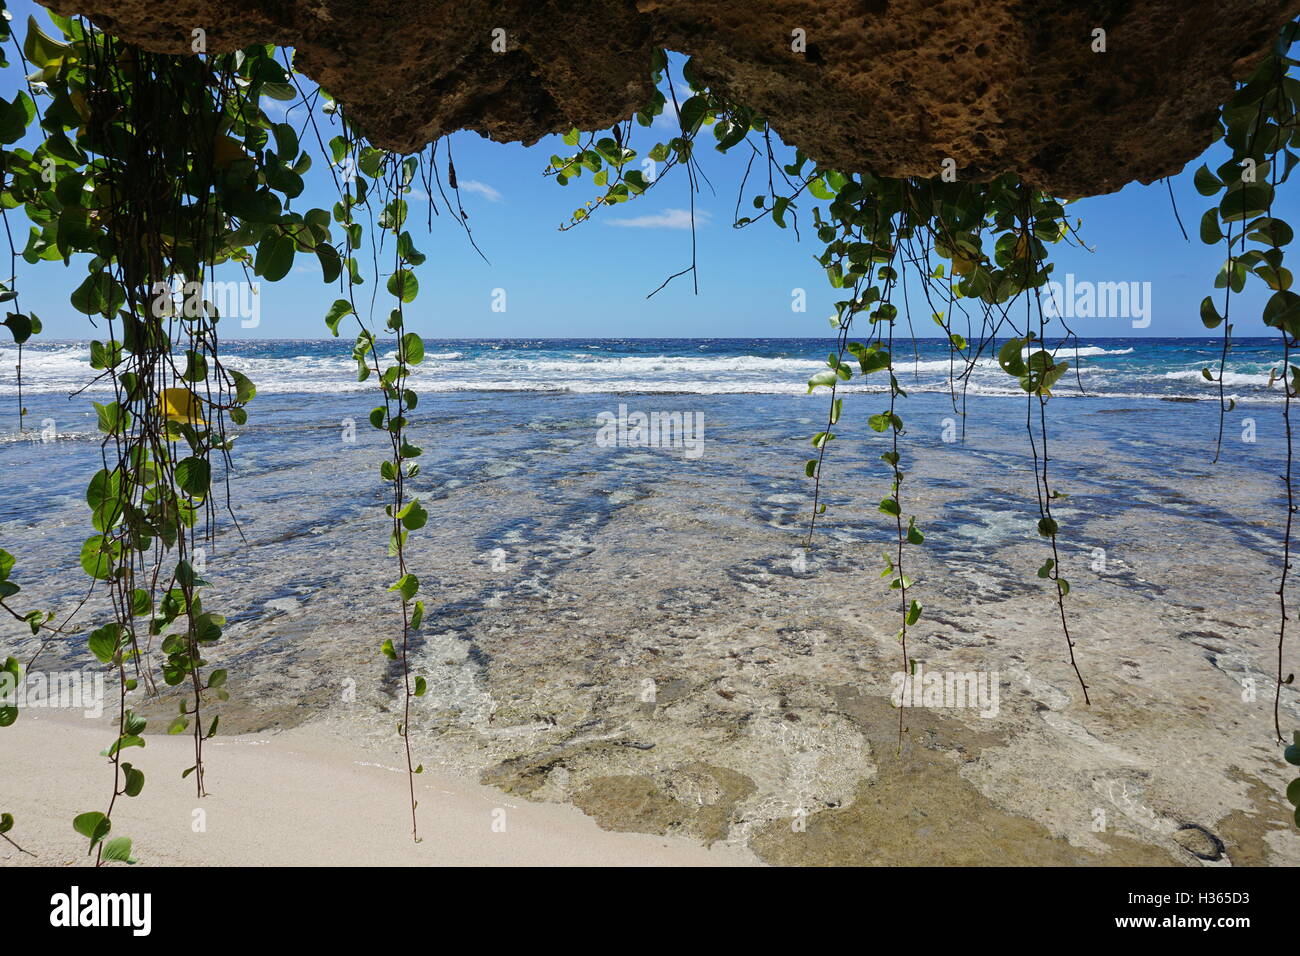 Creeping plant hanging down from the rocks on the sea shore of the island of Rurutu, Pacific ocean, Austral, French Polynesia Stock Photo